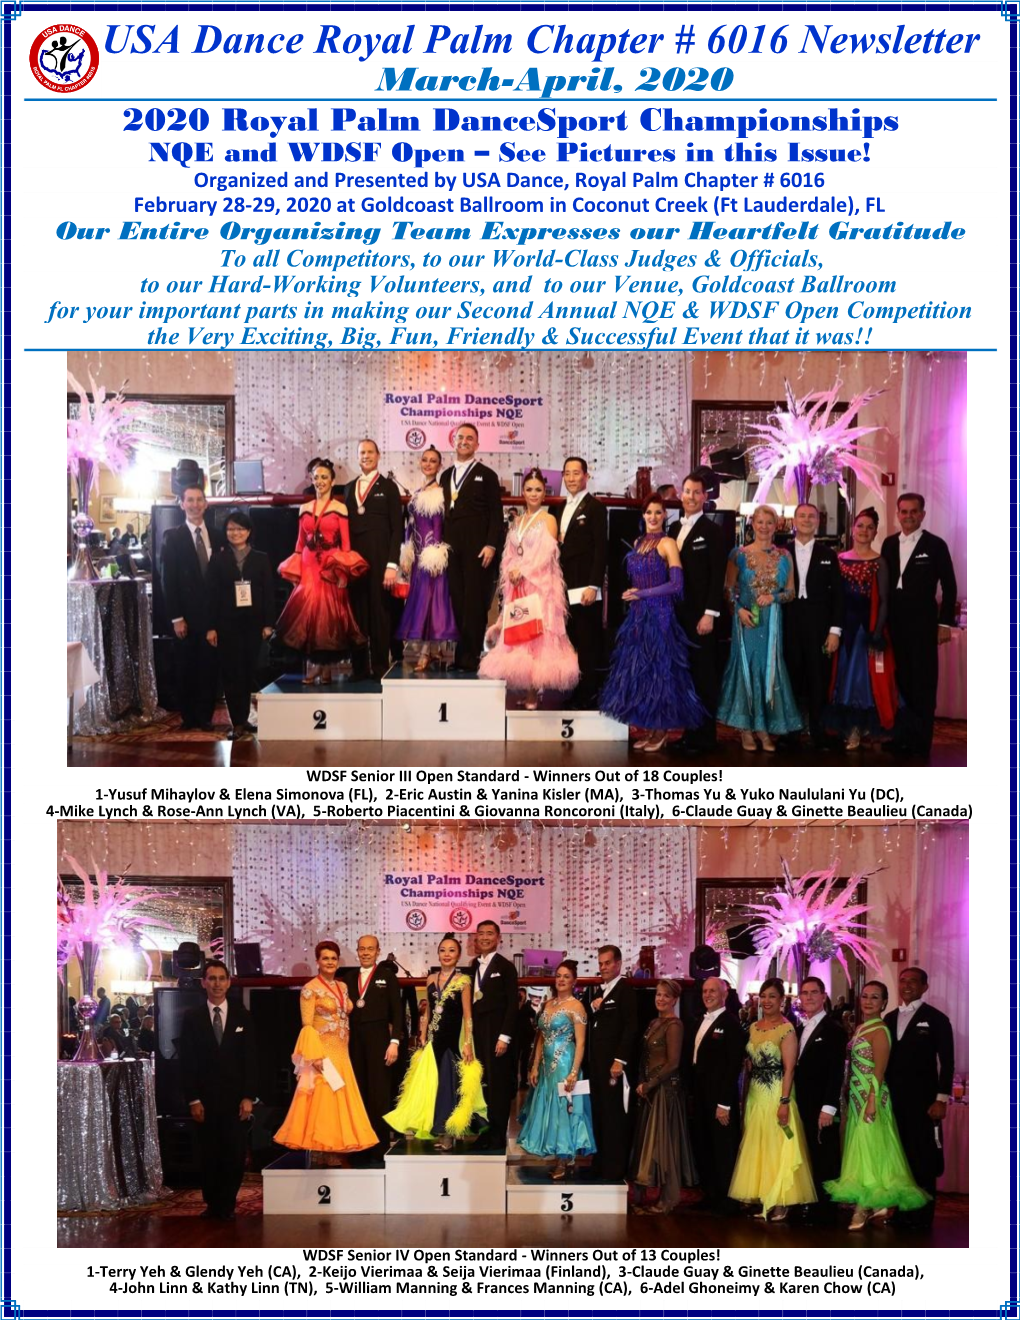 USA Dance Royal Palm Chapter # 6016 Newsletter March-April, 2020